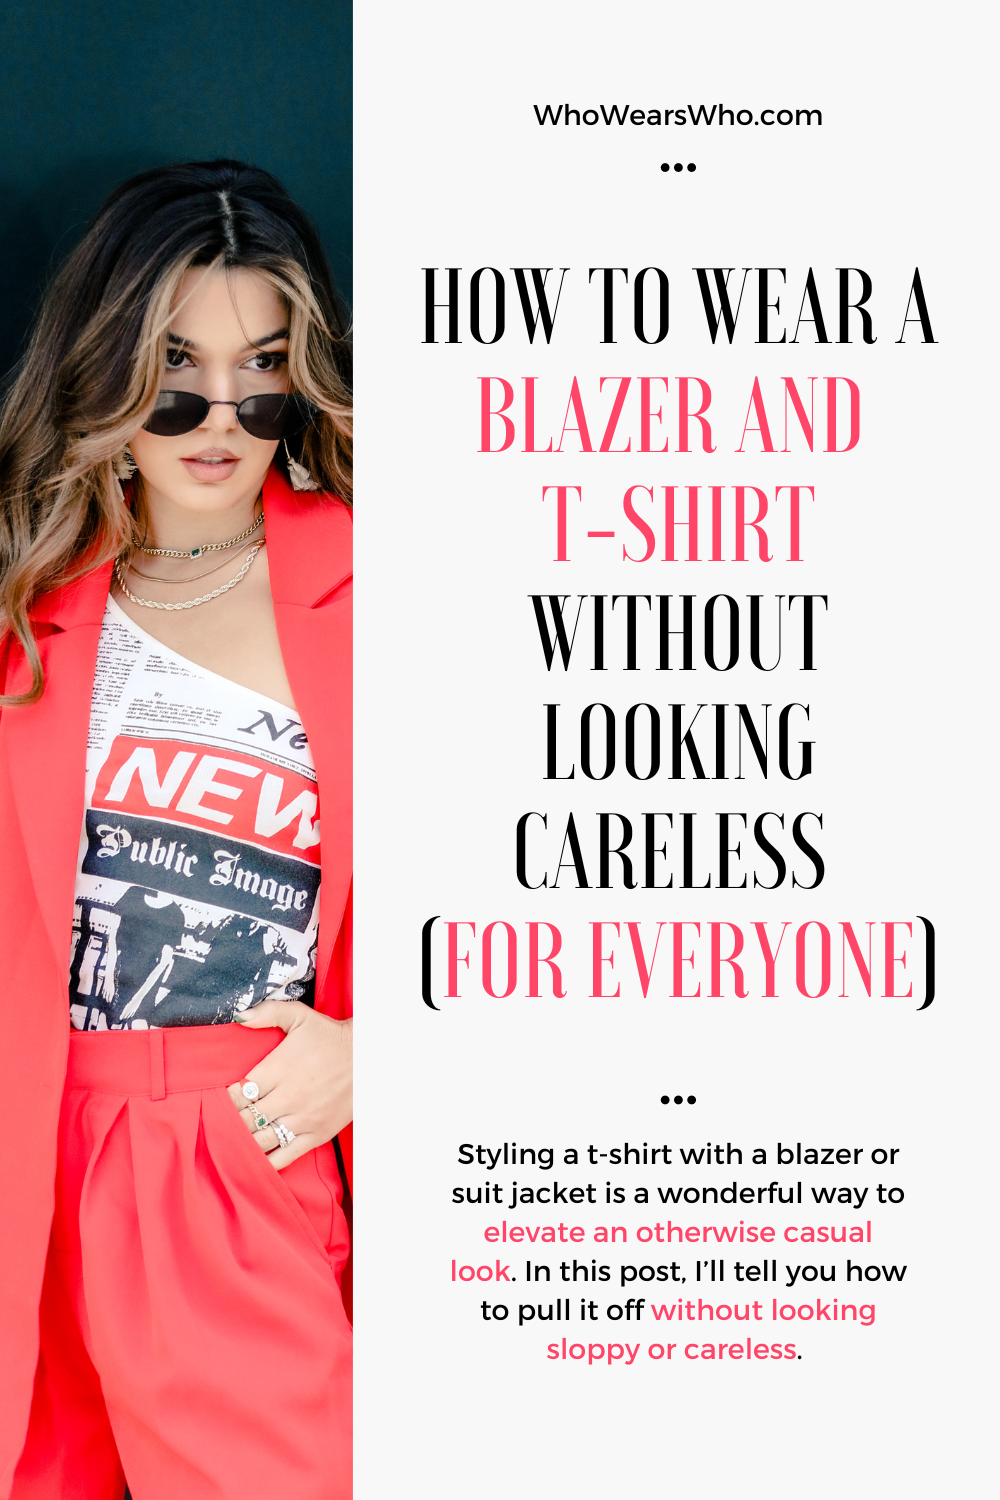 How to wear a blazer and t-shirt without looking careless